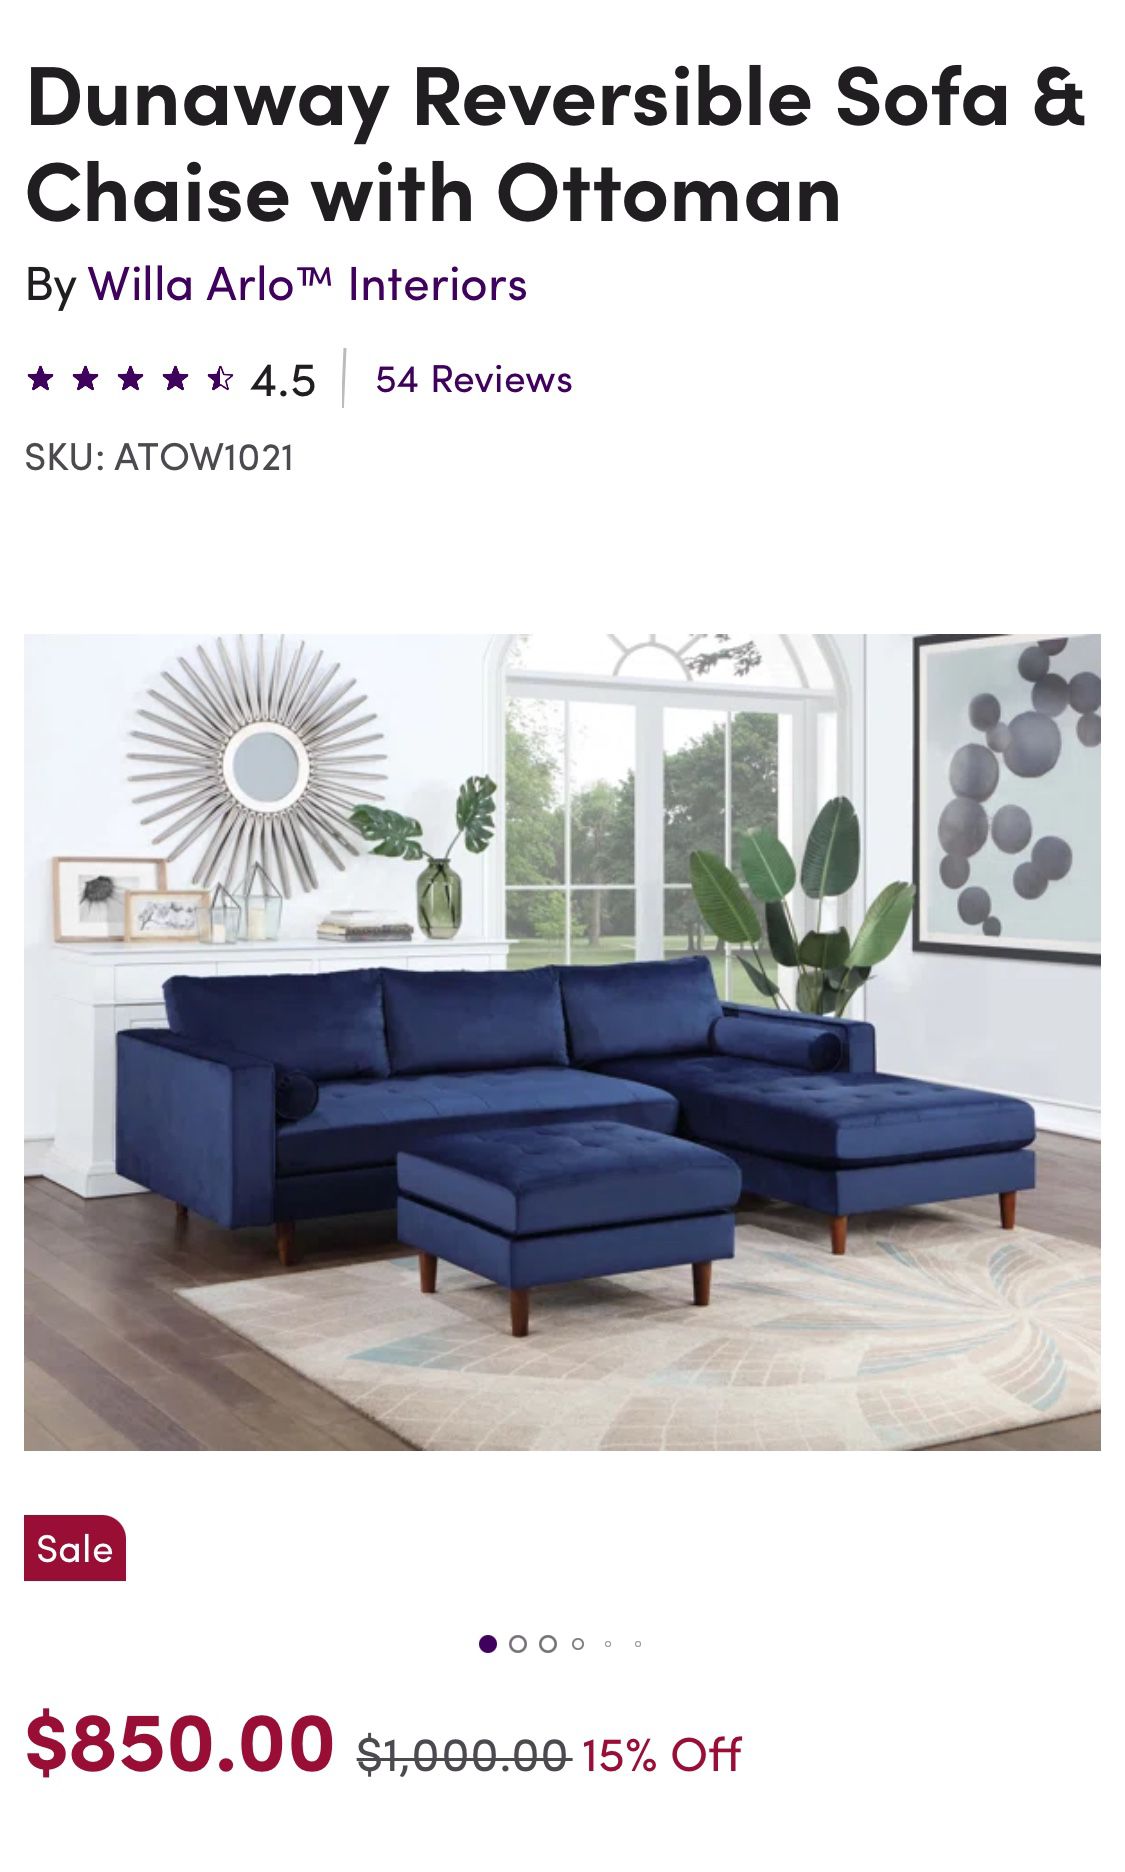 New in box Blue Velvet Reversible Sofa & Chaise with Ottoman